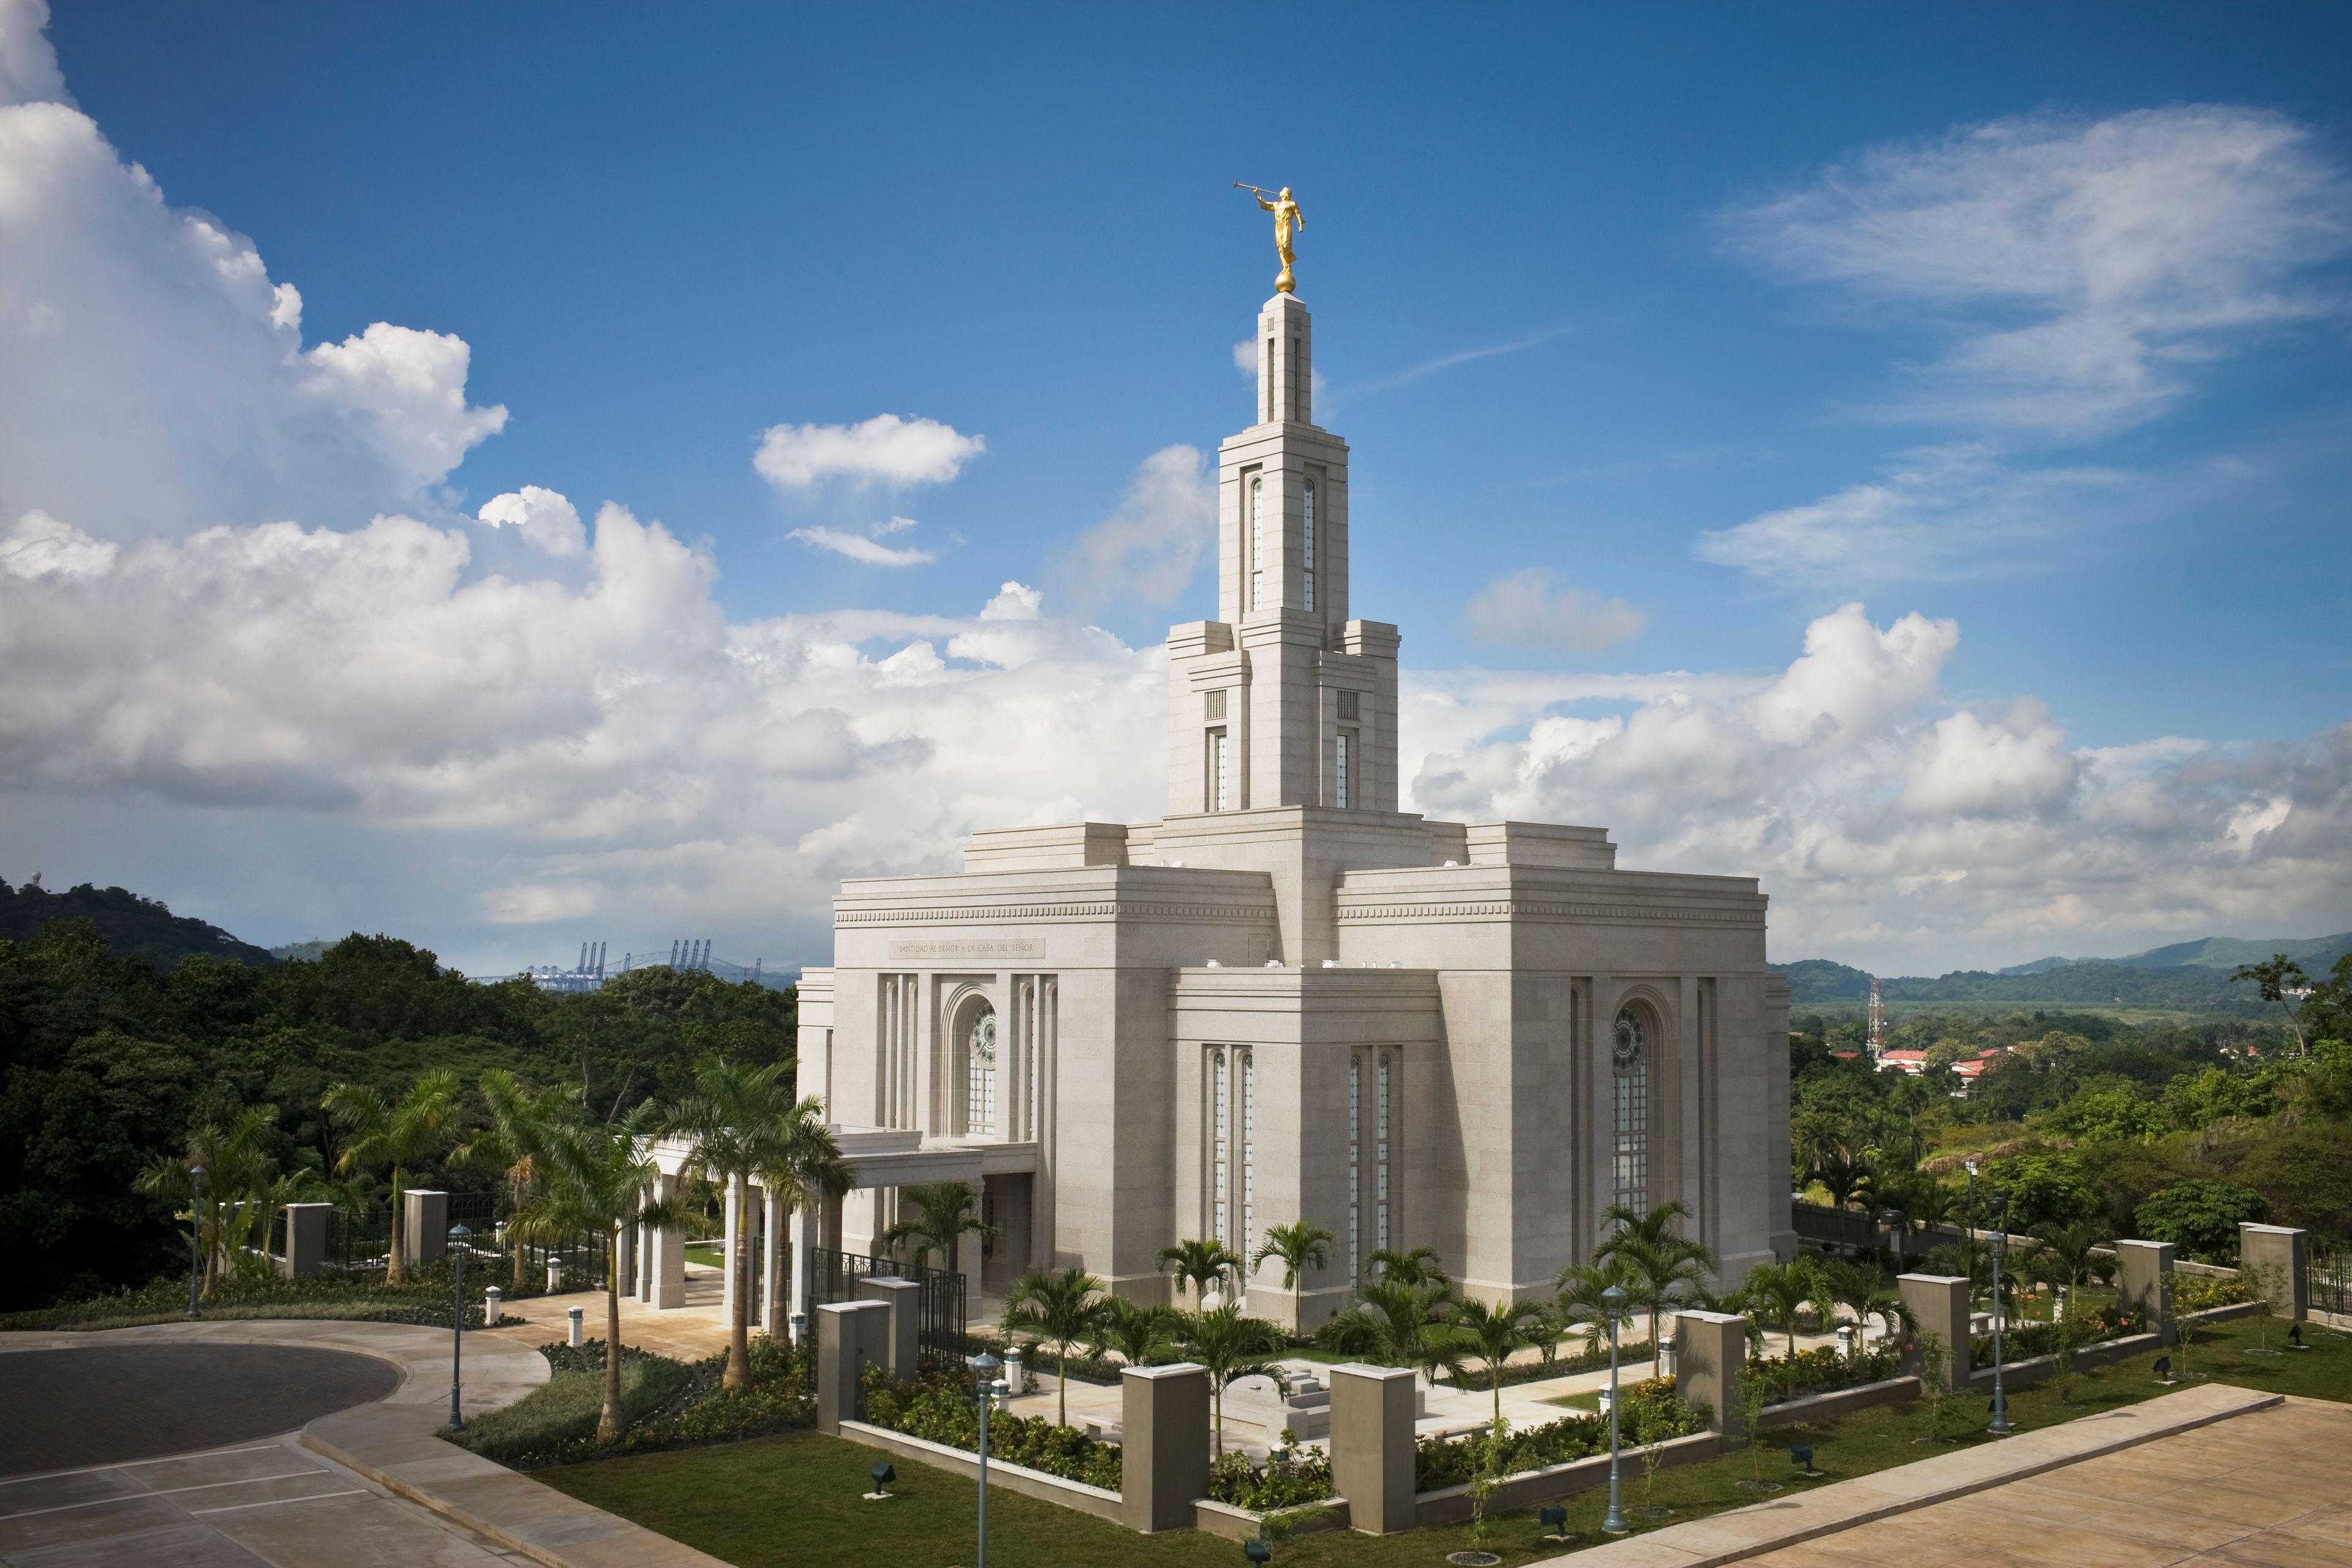 A side view of the Panama City Panama Temple, surrounded by palm trees, with large white clouds overhead.